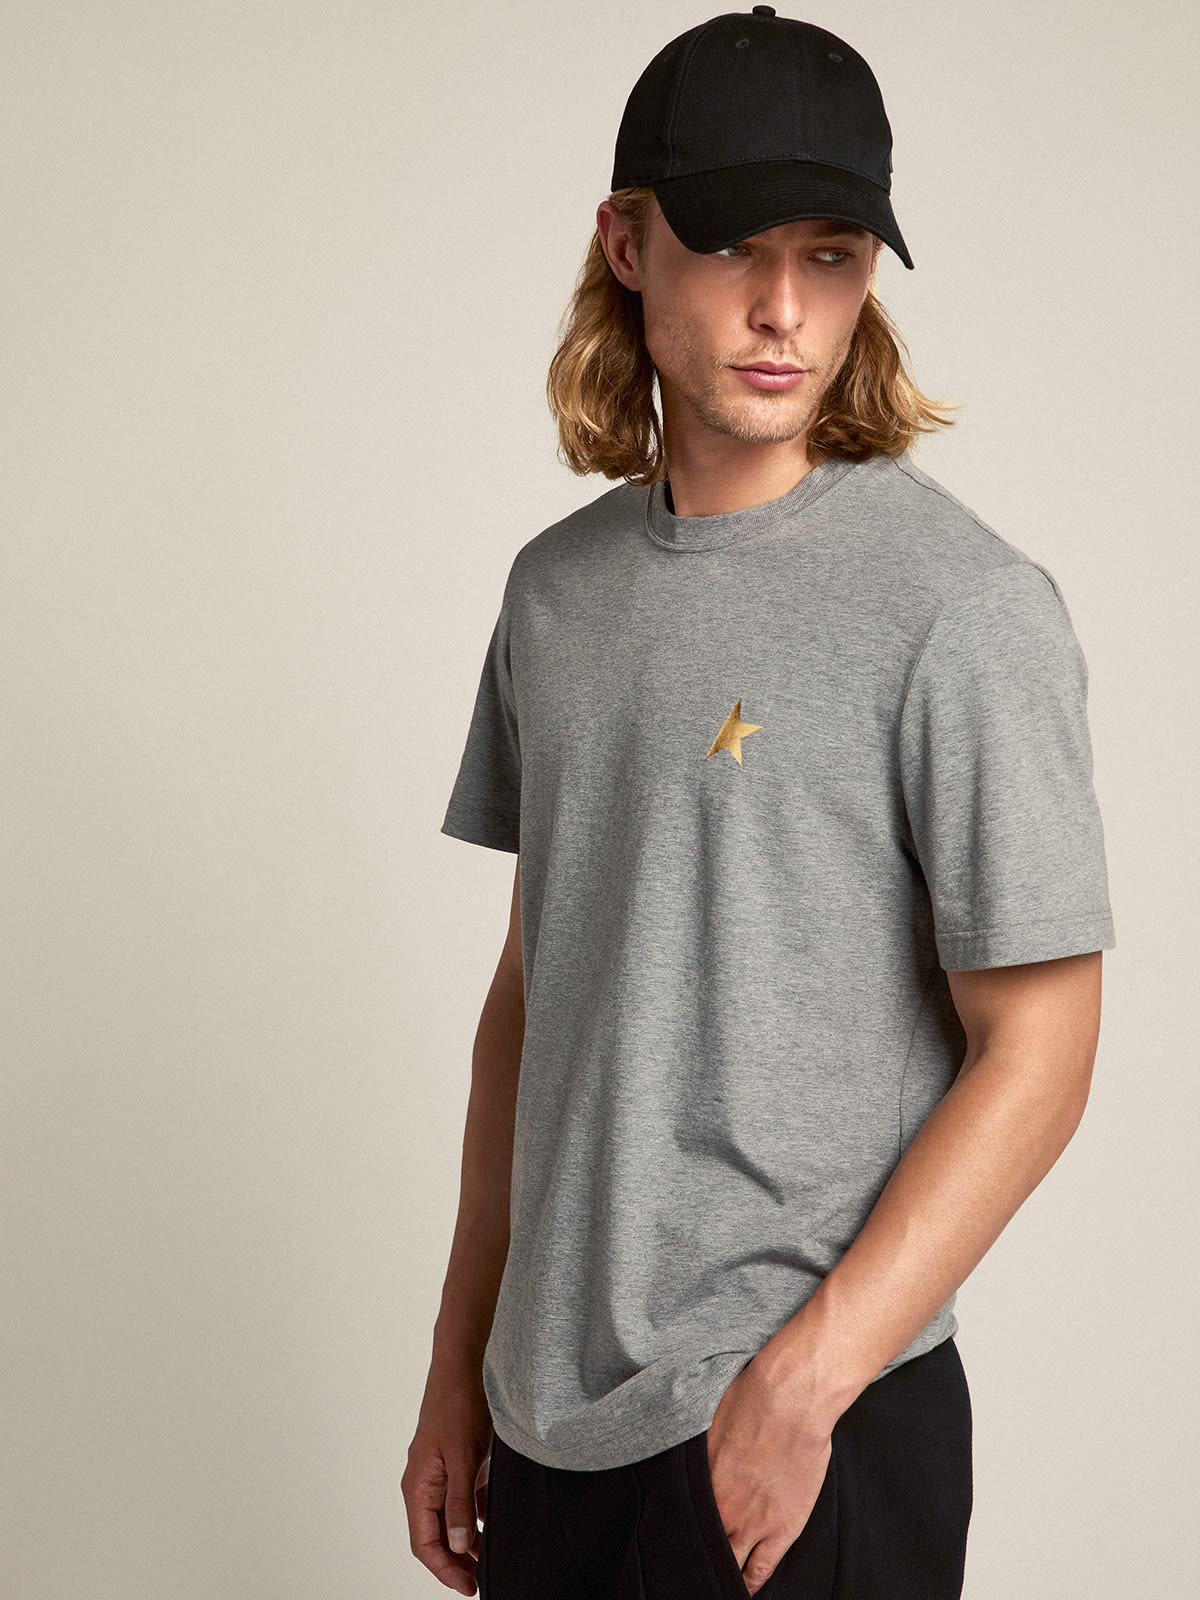 Golden Goose - Men's mélange gray T-shirt with gold star on the front in 